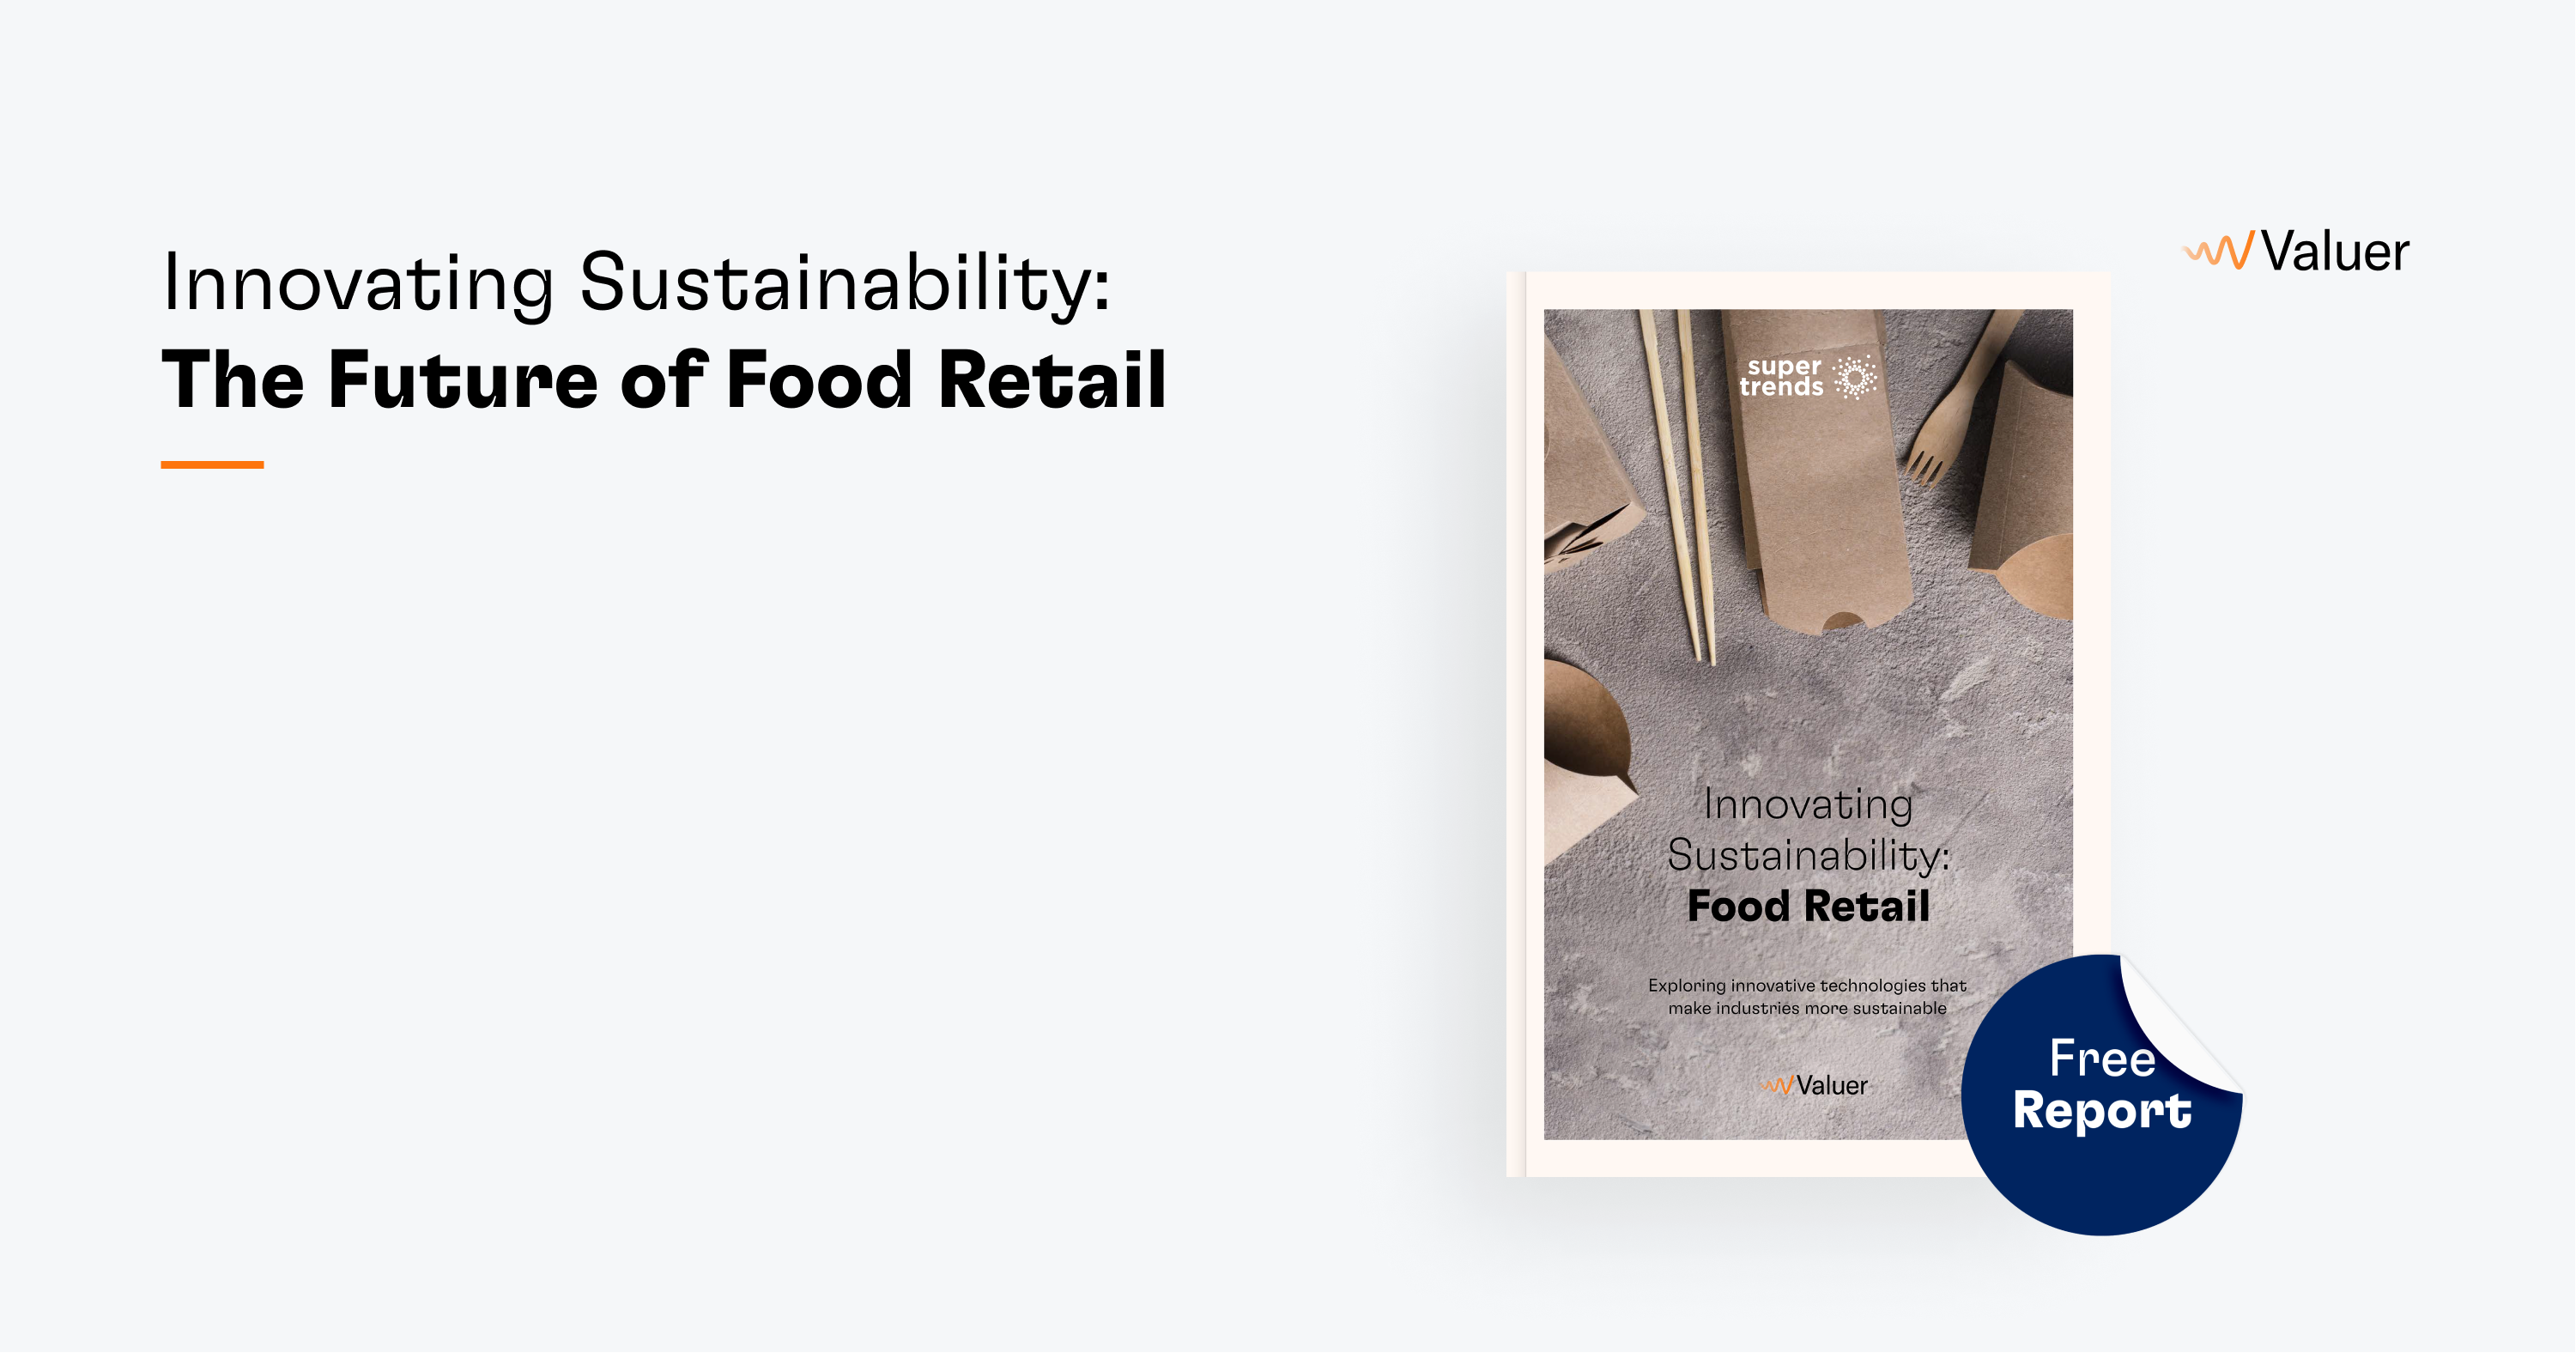 Innovating Sustainability: The Future of Food Retail